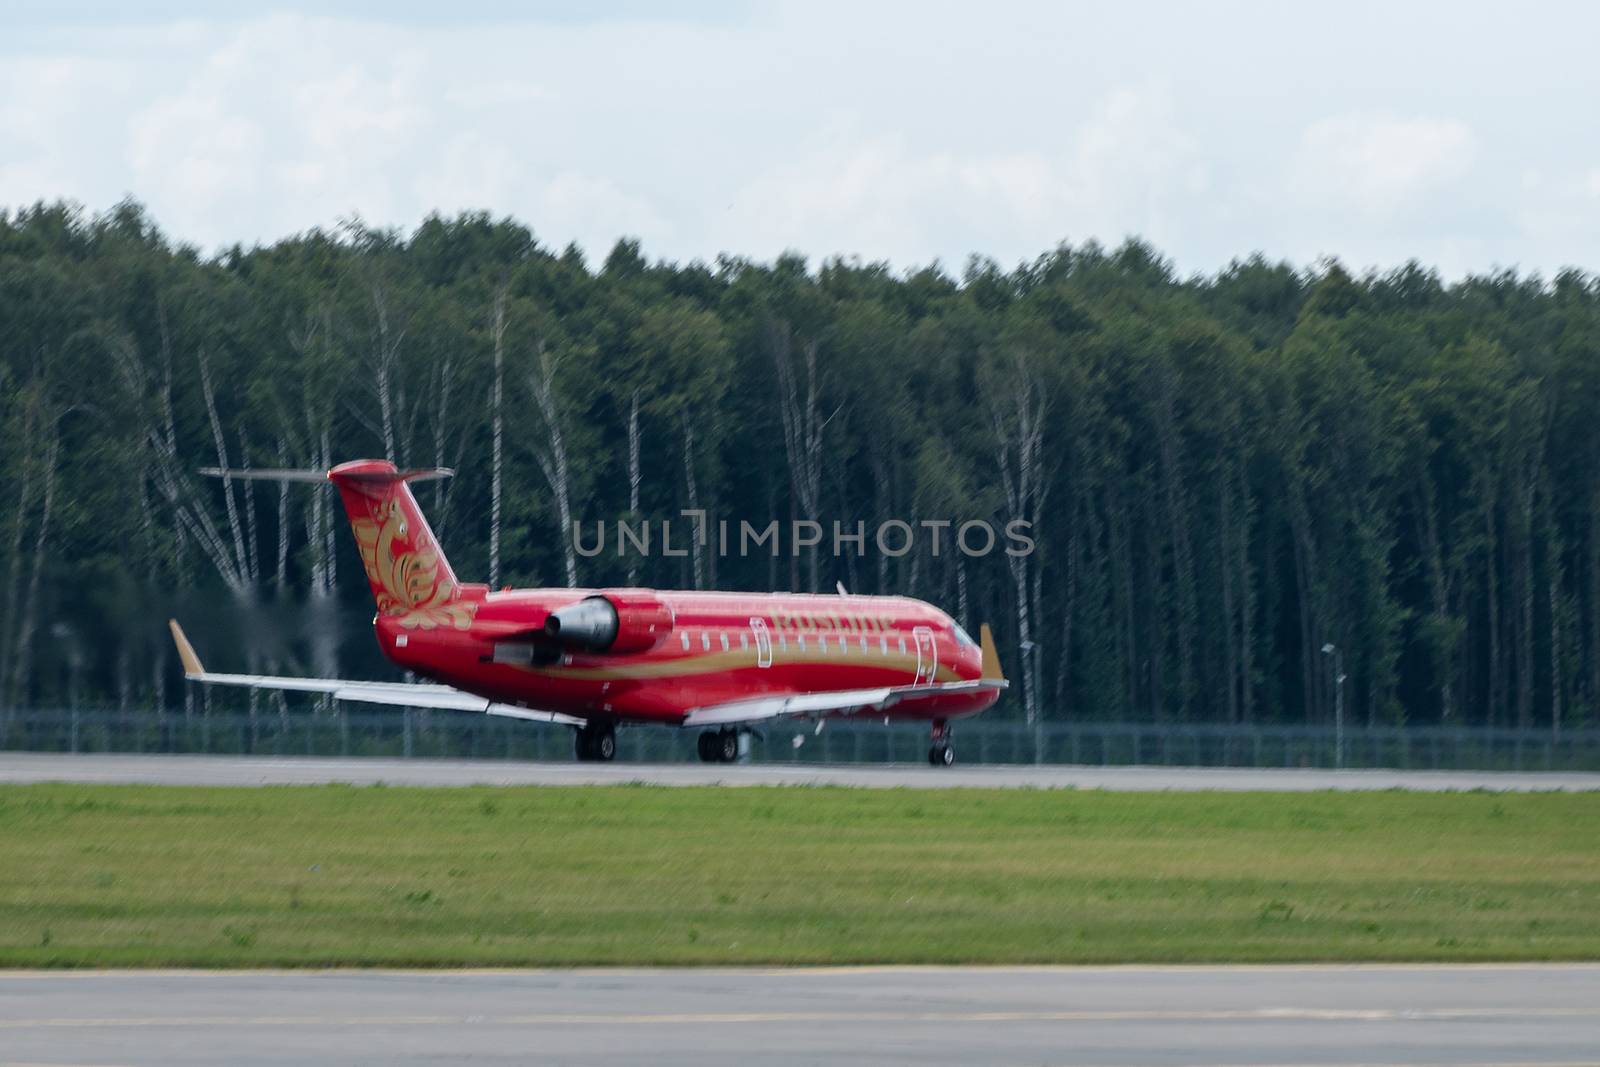 July 2, 2019, Moscow, Russia. Airplane Bombardier CRJ-100 Rusline airline at Vnukovo airport in Moscow.